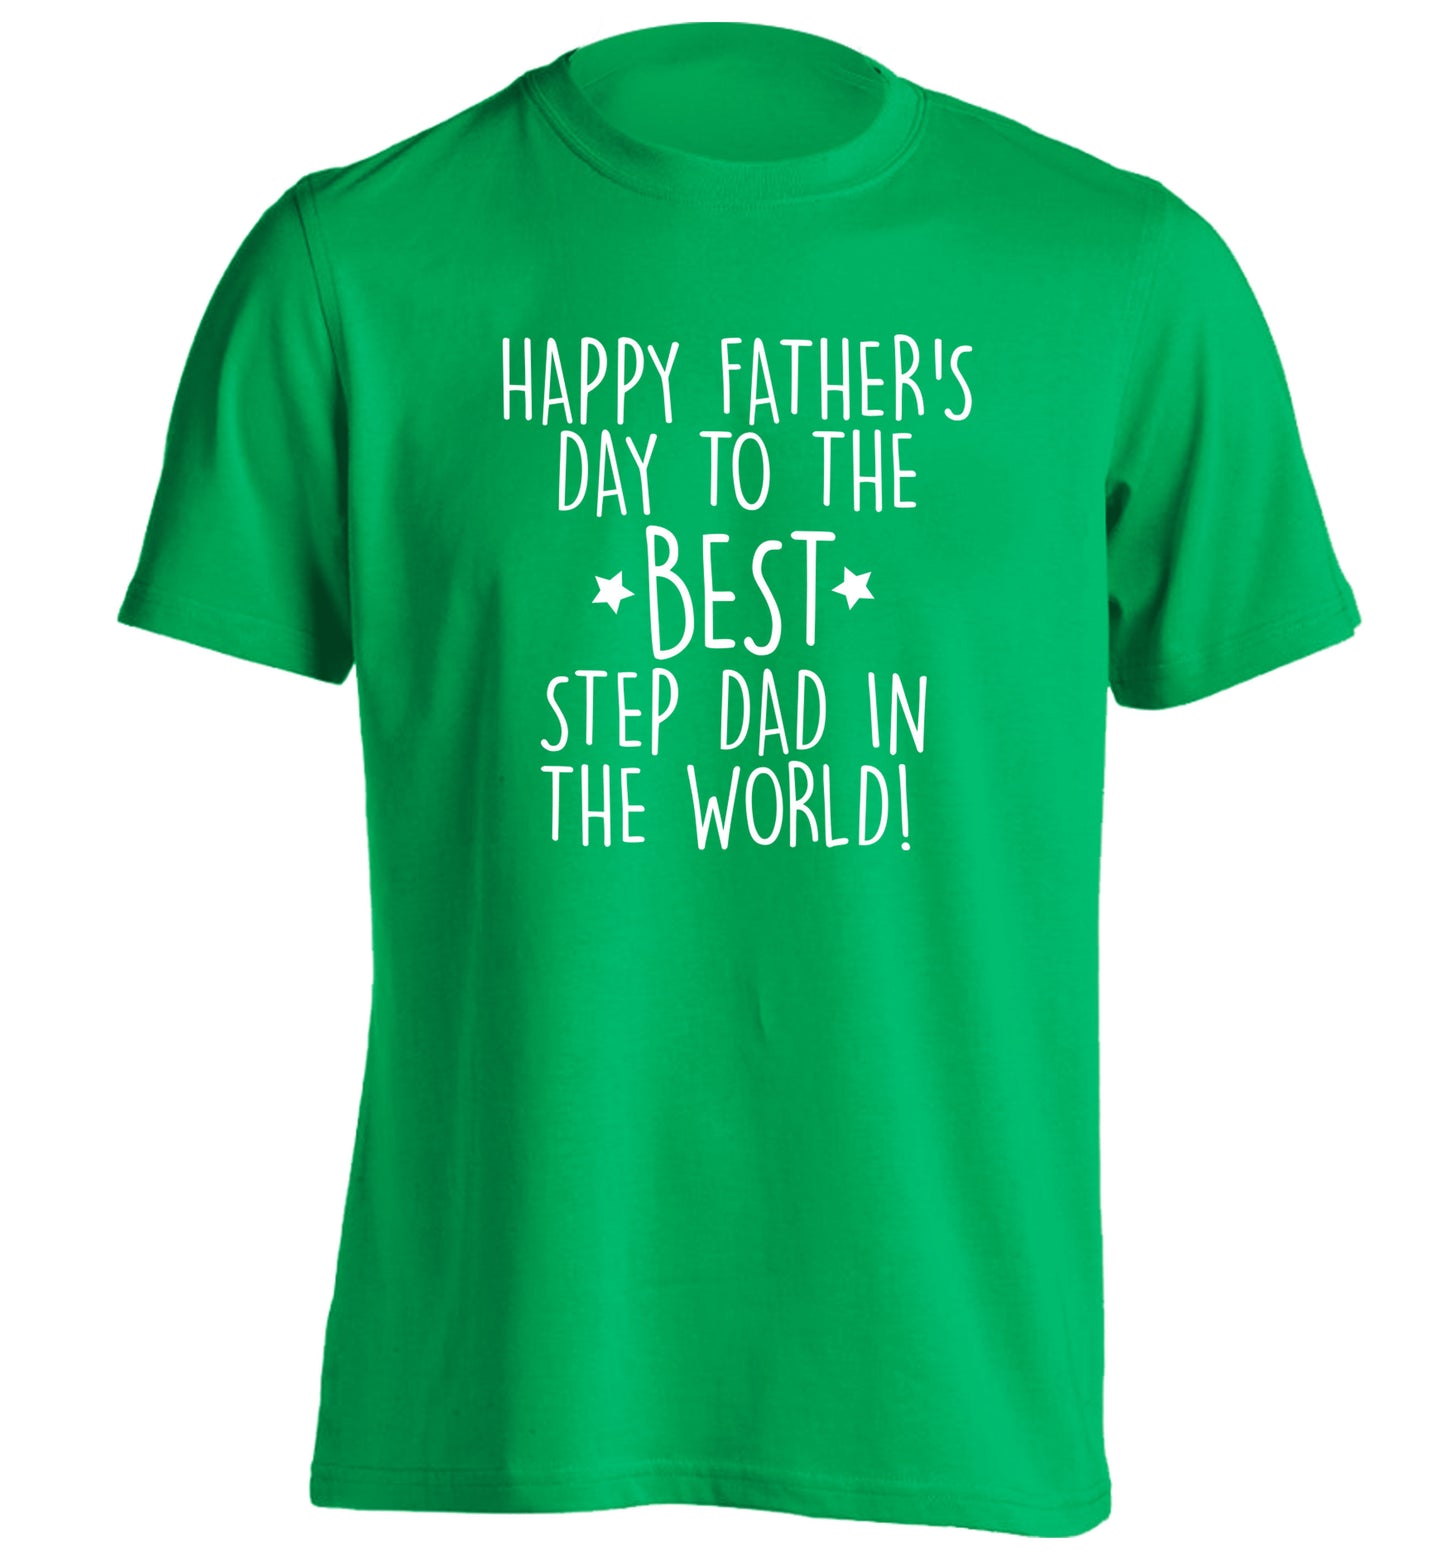 Happy Father's day to the best step dad in the world! adults unisex green Tshirt 2XL